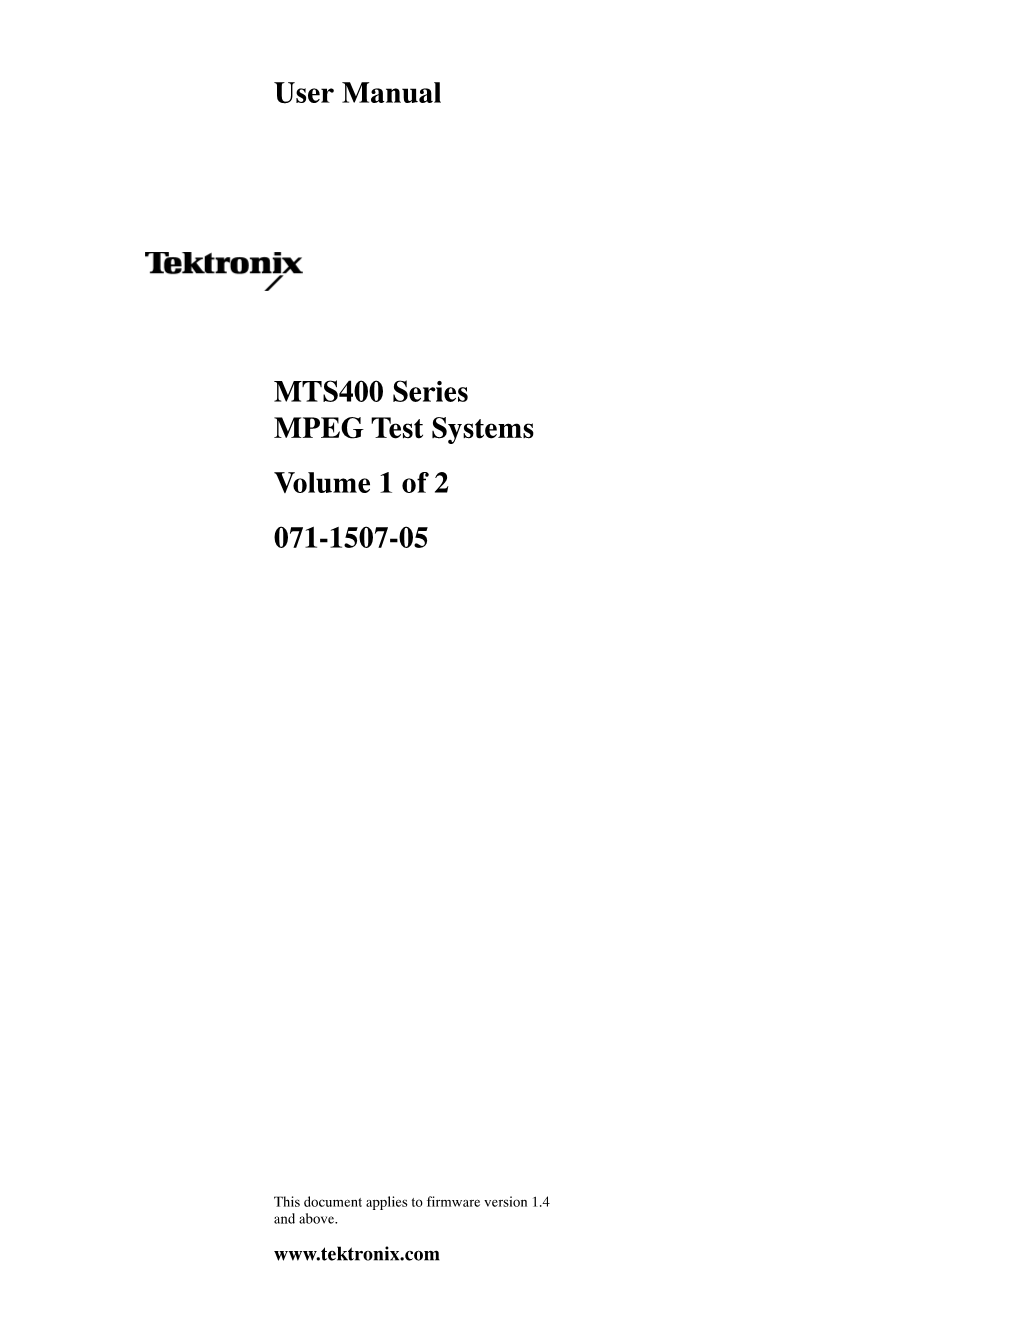 MTS400 Series MPEG Test Systems User Manual I Table of Contents